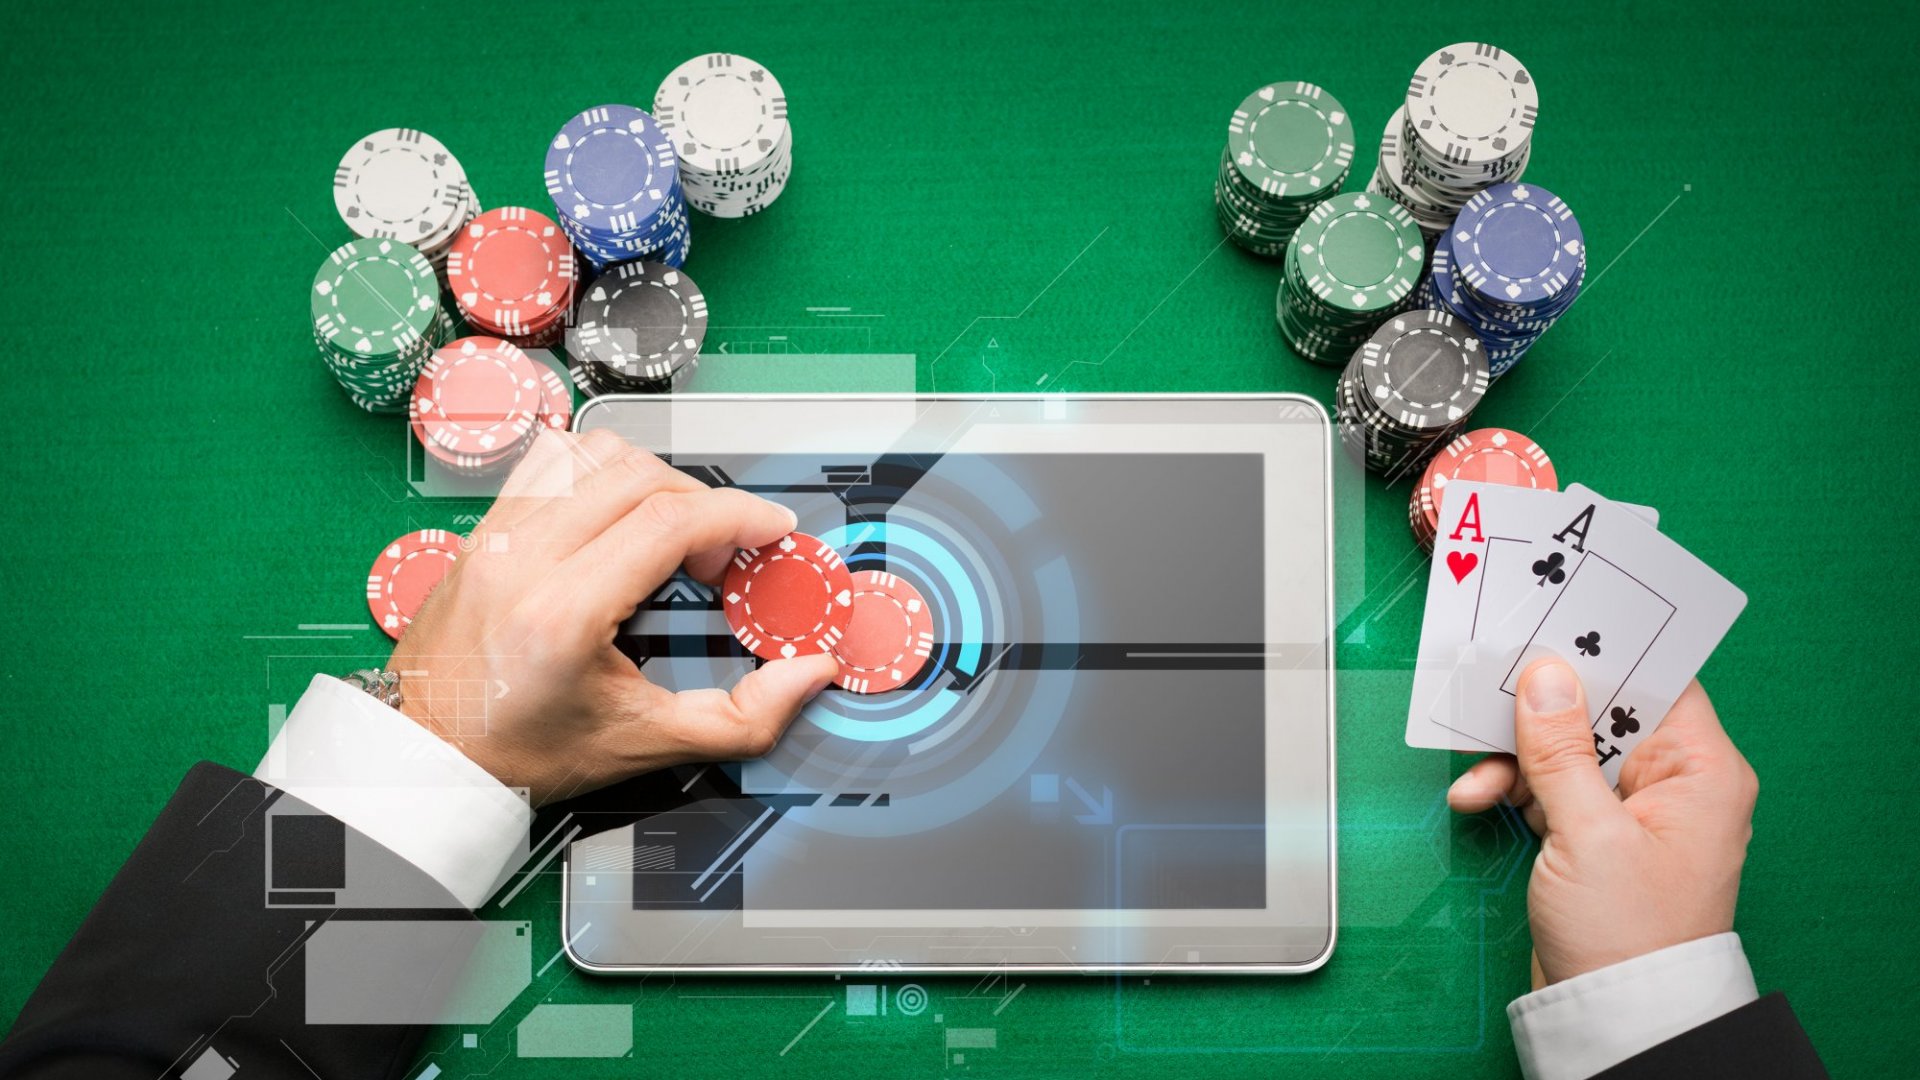 How to Find the Best Odds When Playing Online Casino Games